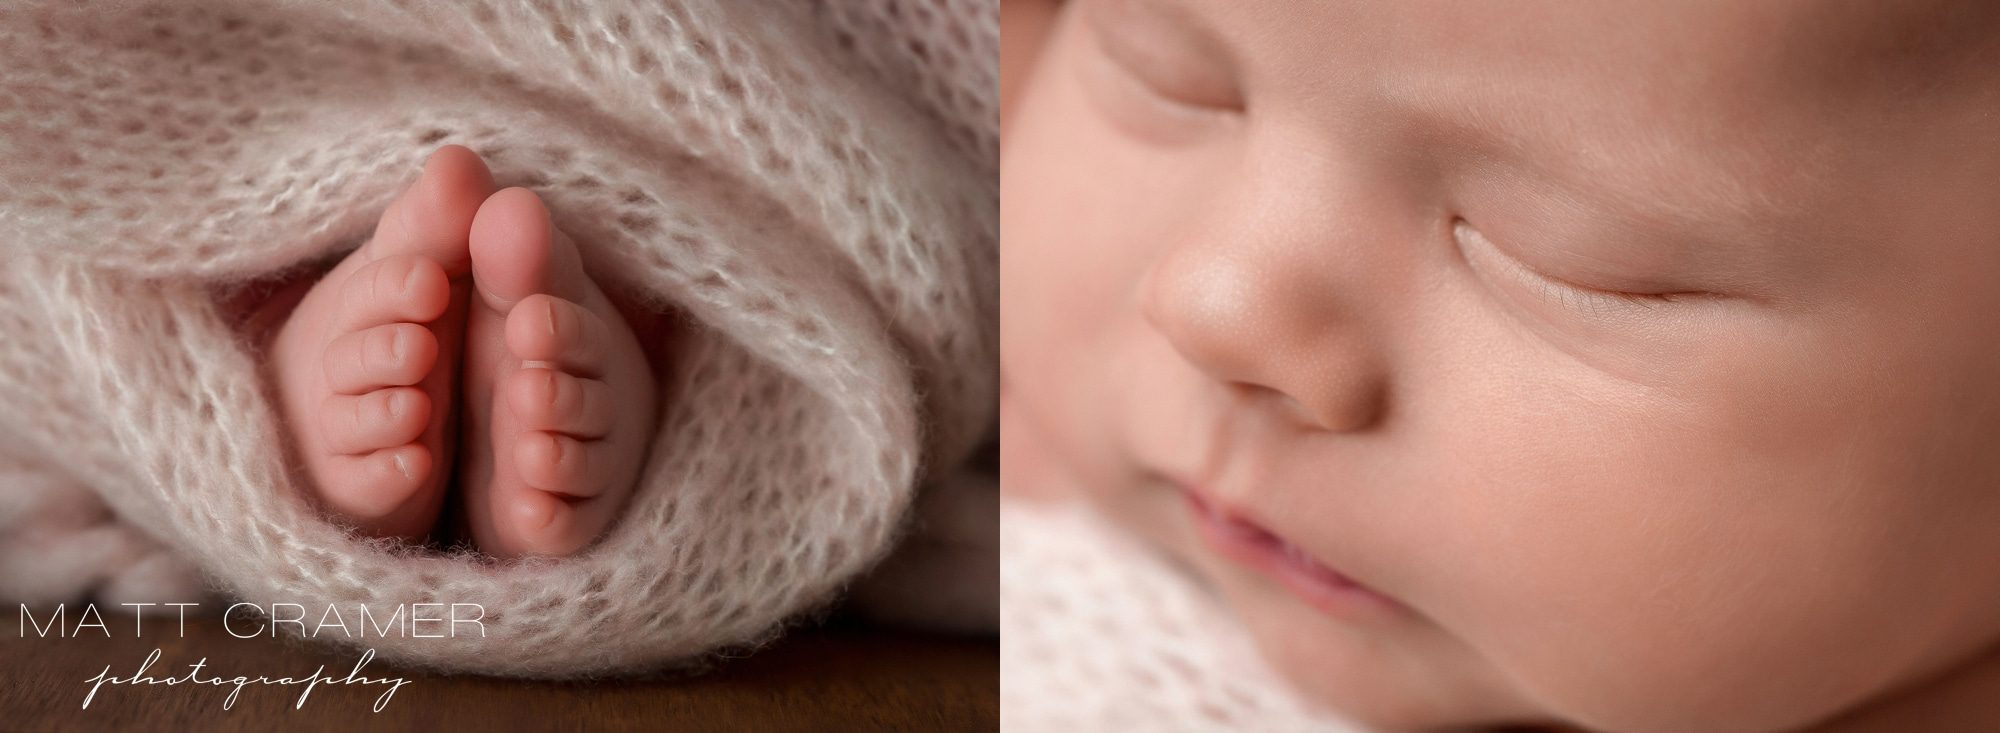 newborn baby toes and close up face